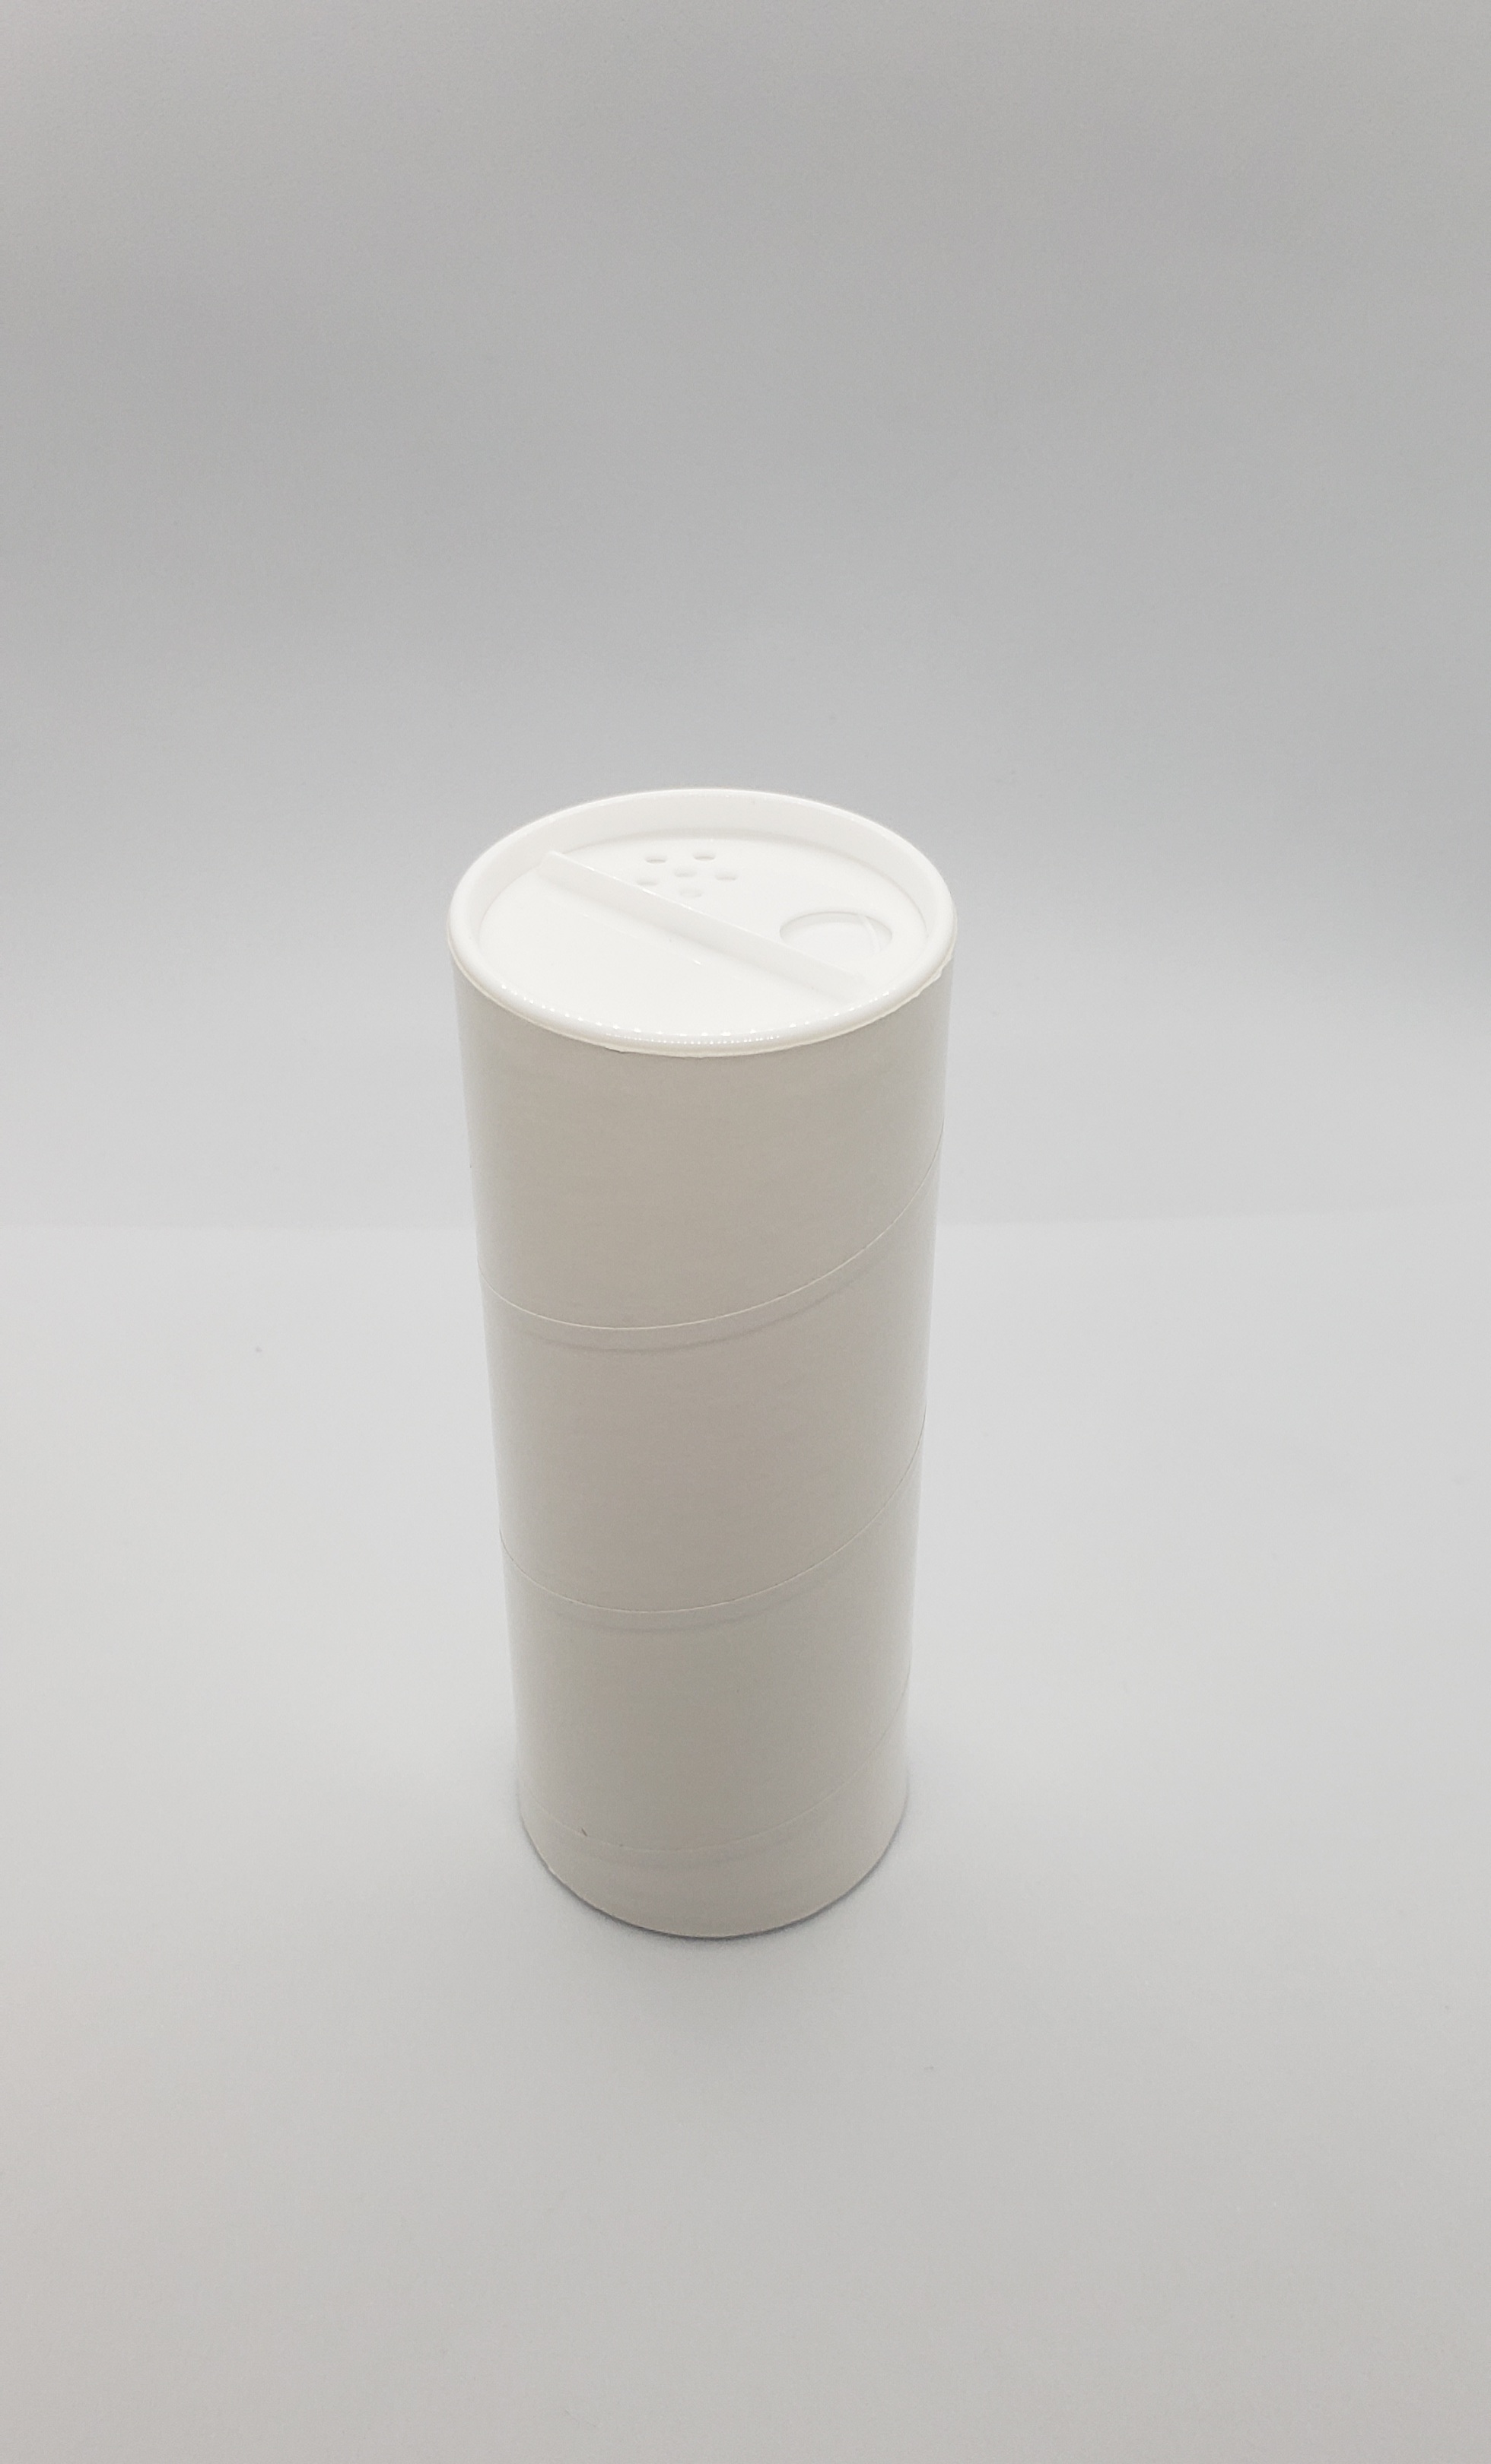 05 oz Paper Powder Shaker Container - White